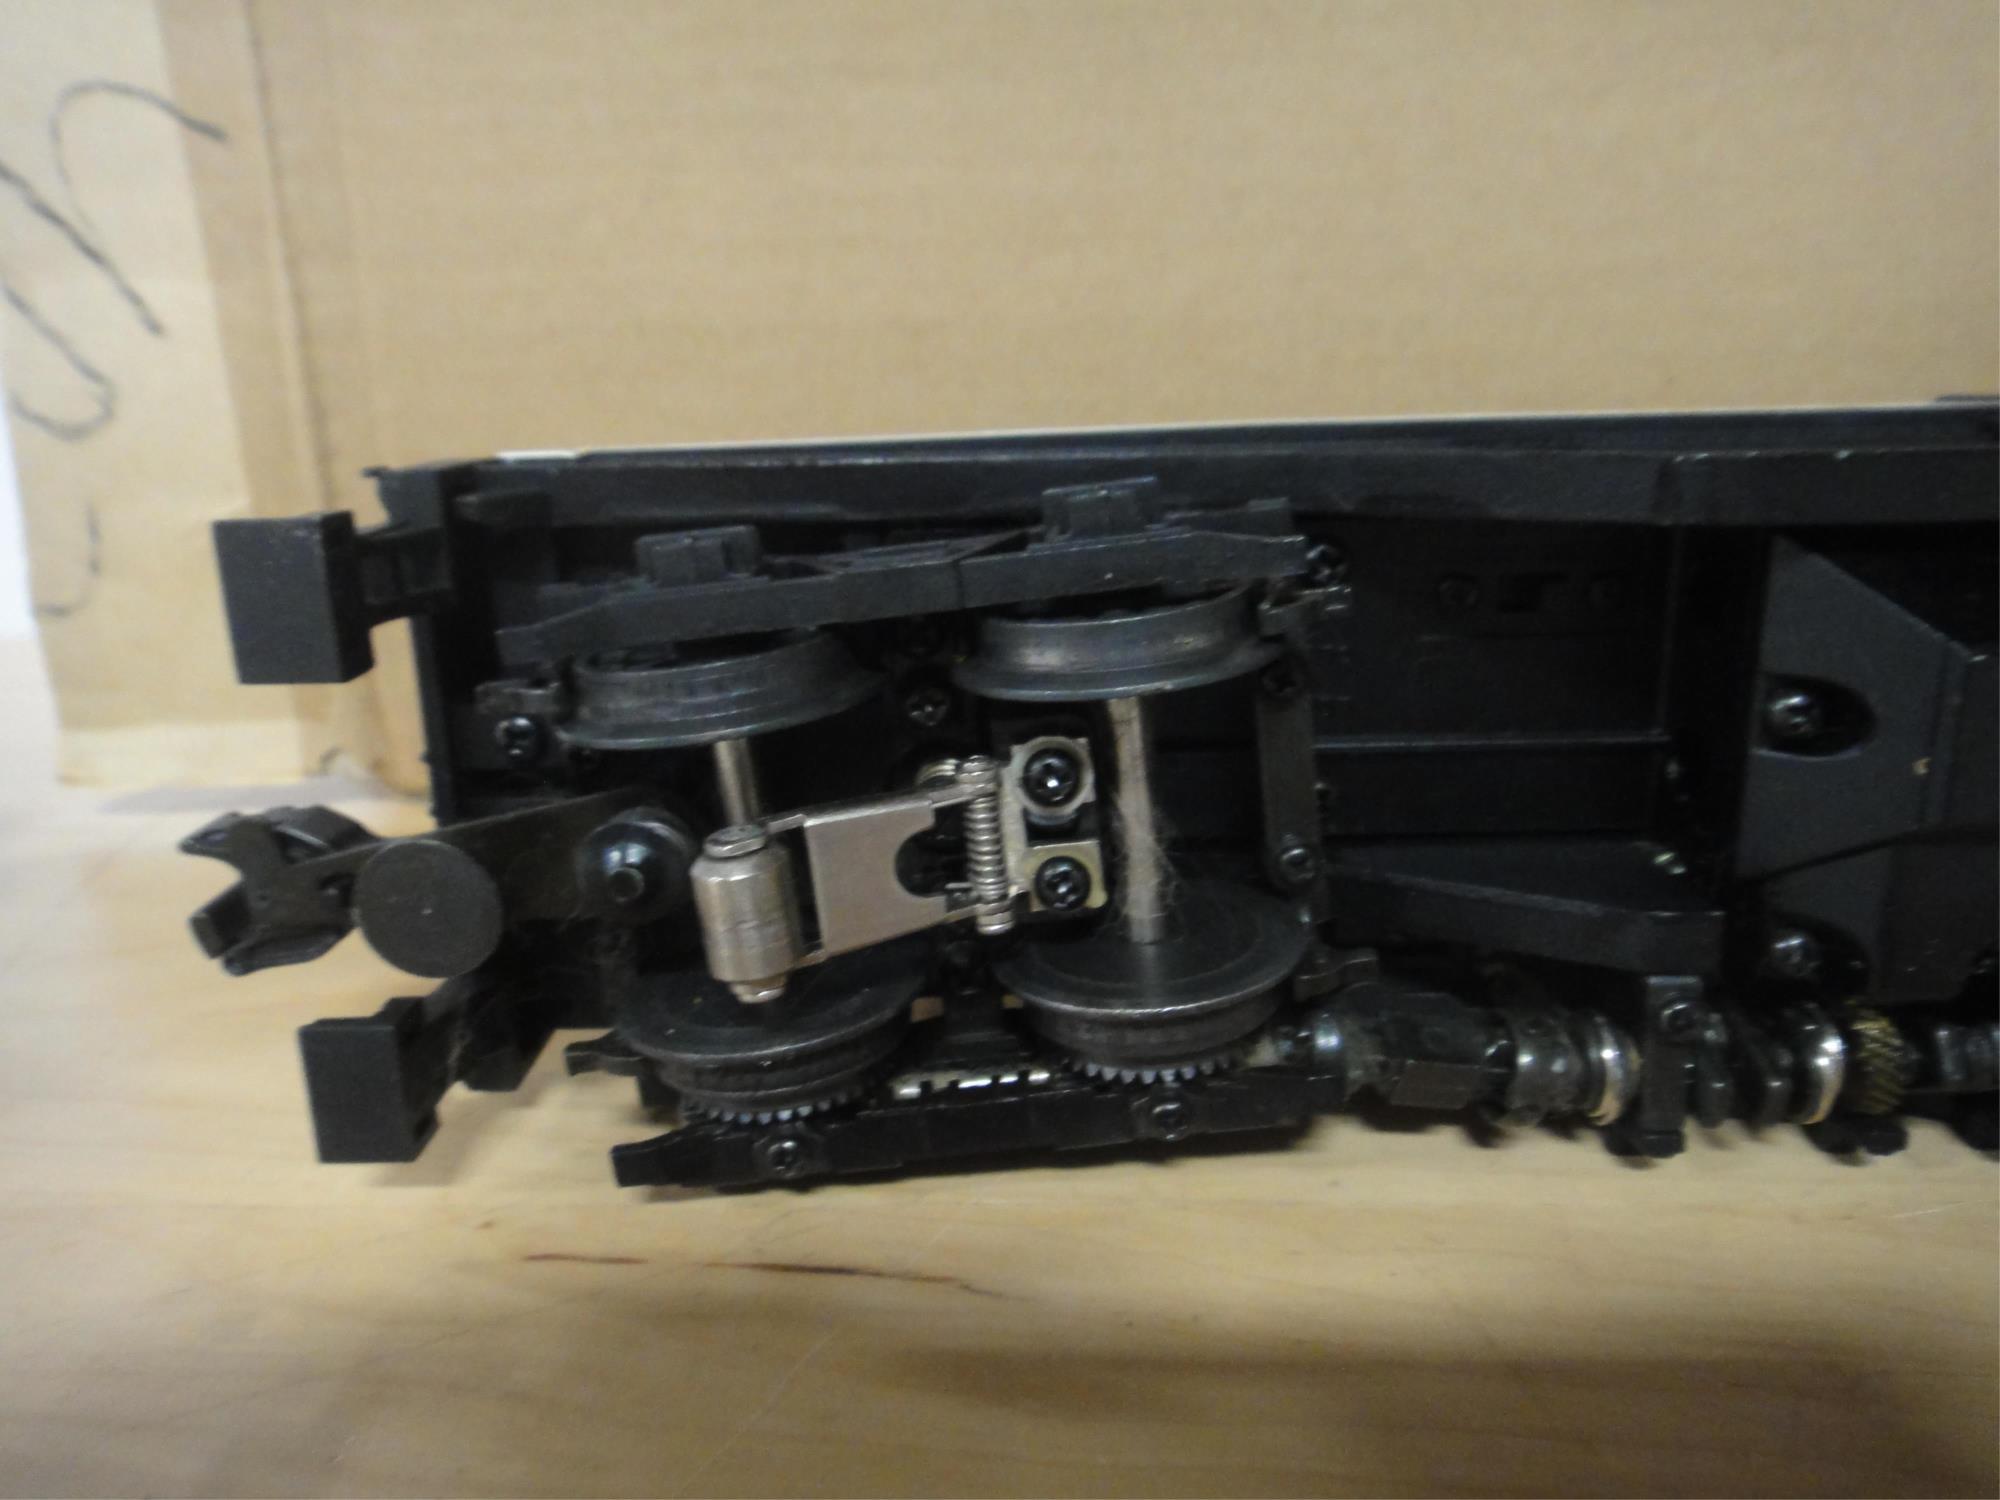 LIONEL WESTERN MARYLAND SHAY ENGINE WITH